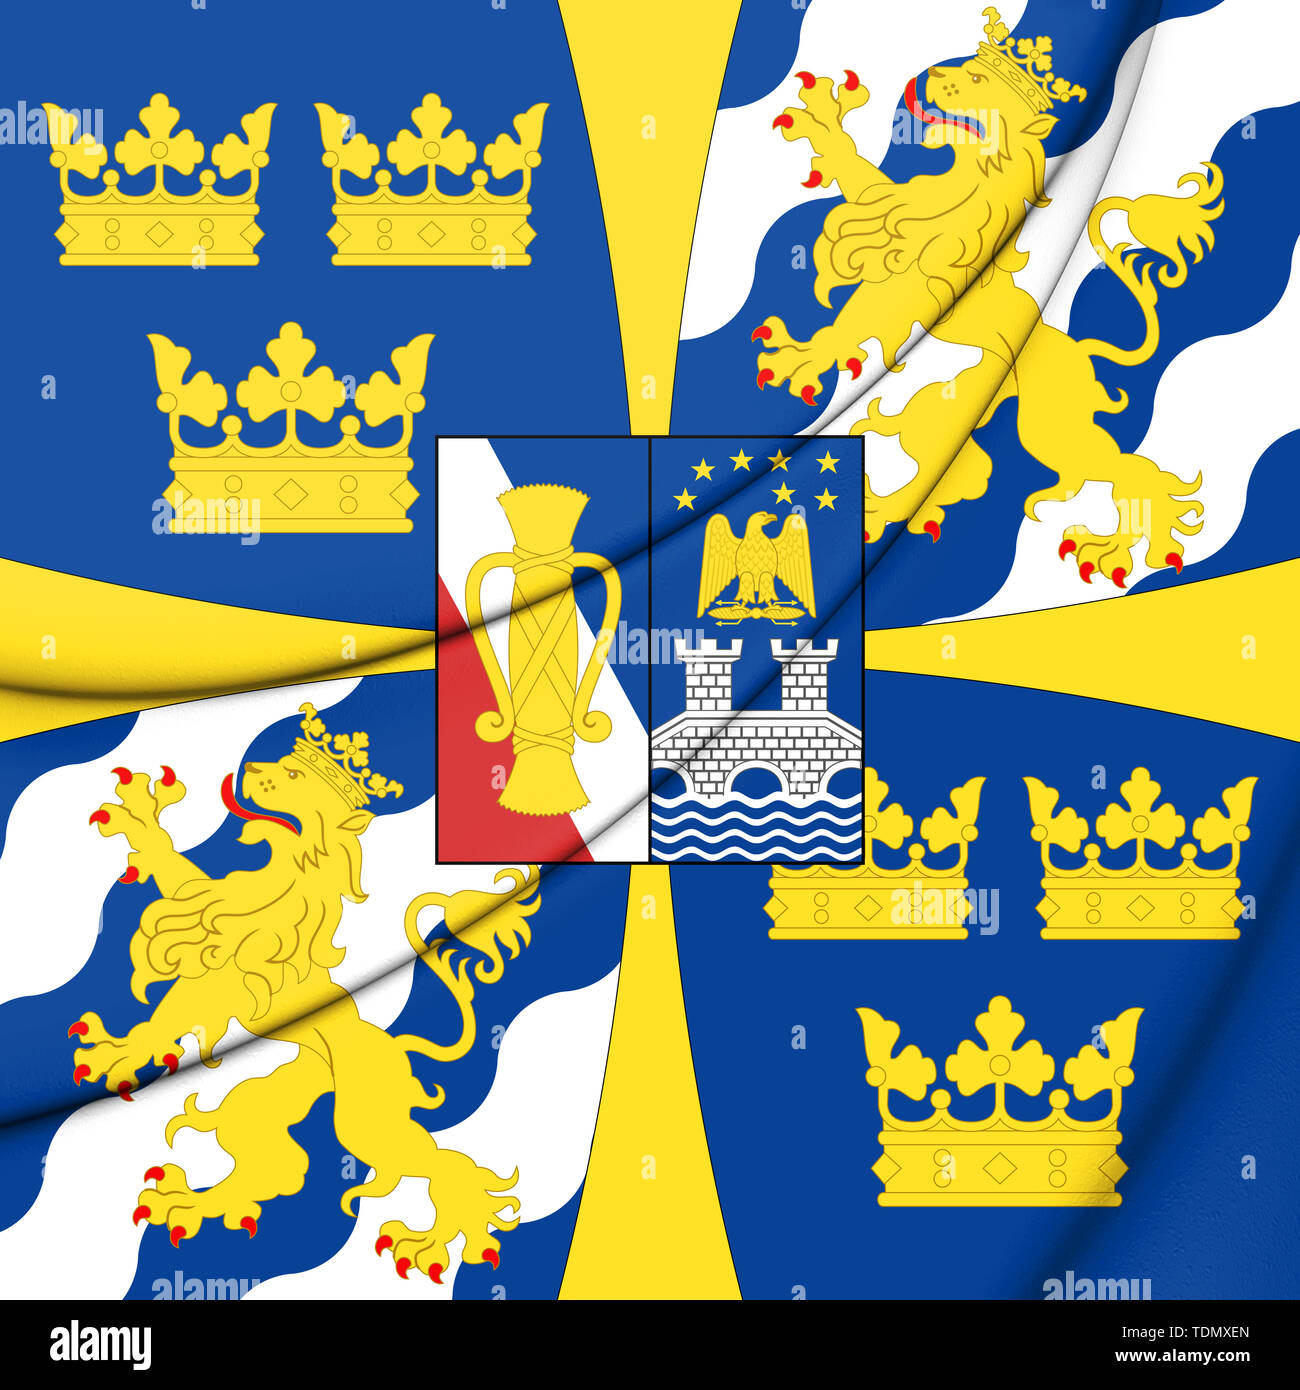 3D King of Sweden Personal Command Sign. 3D Illustration. Stock Photo